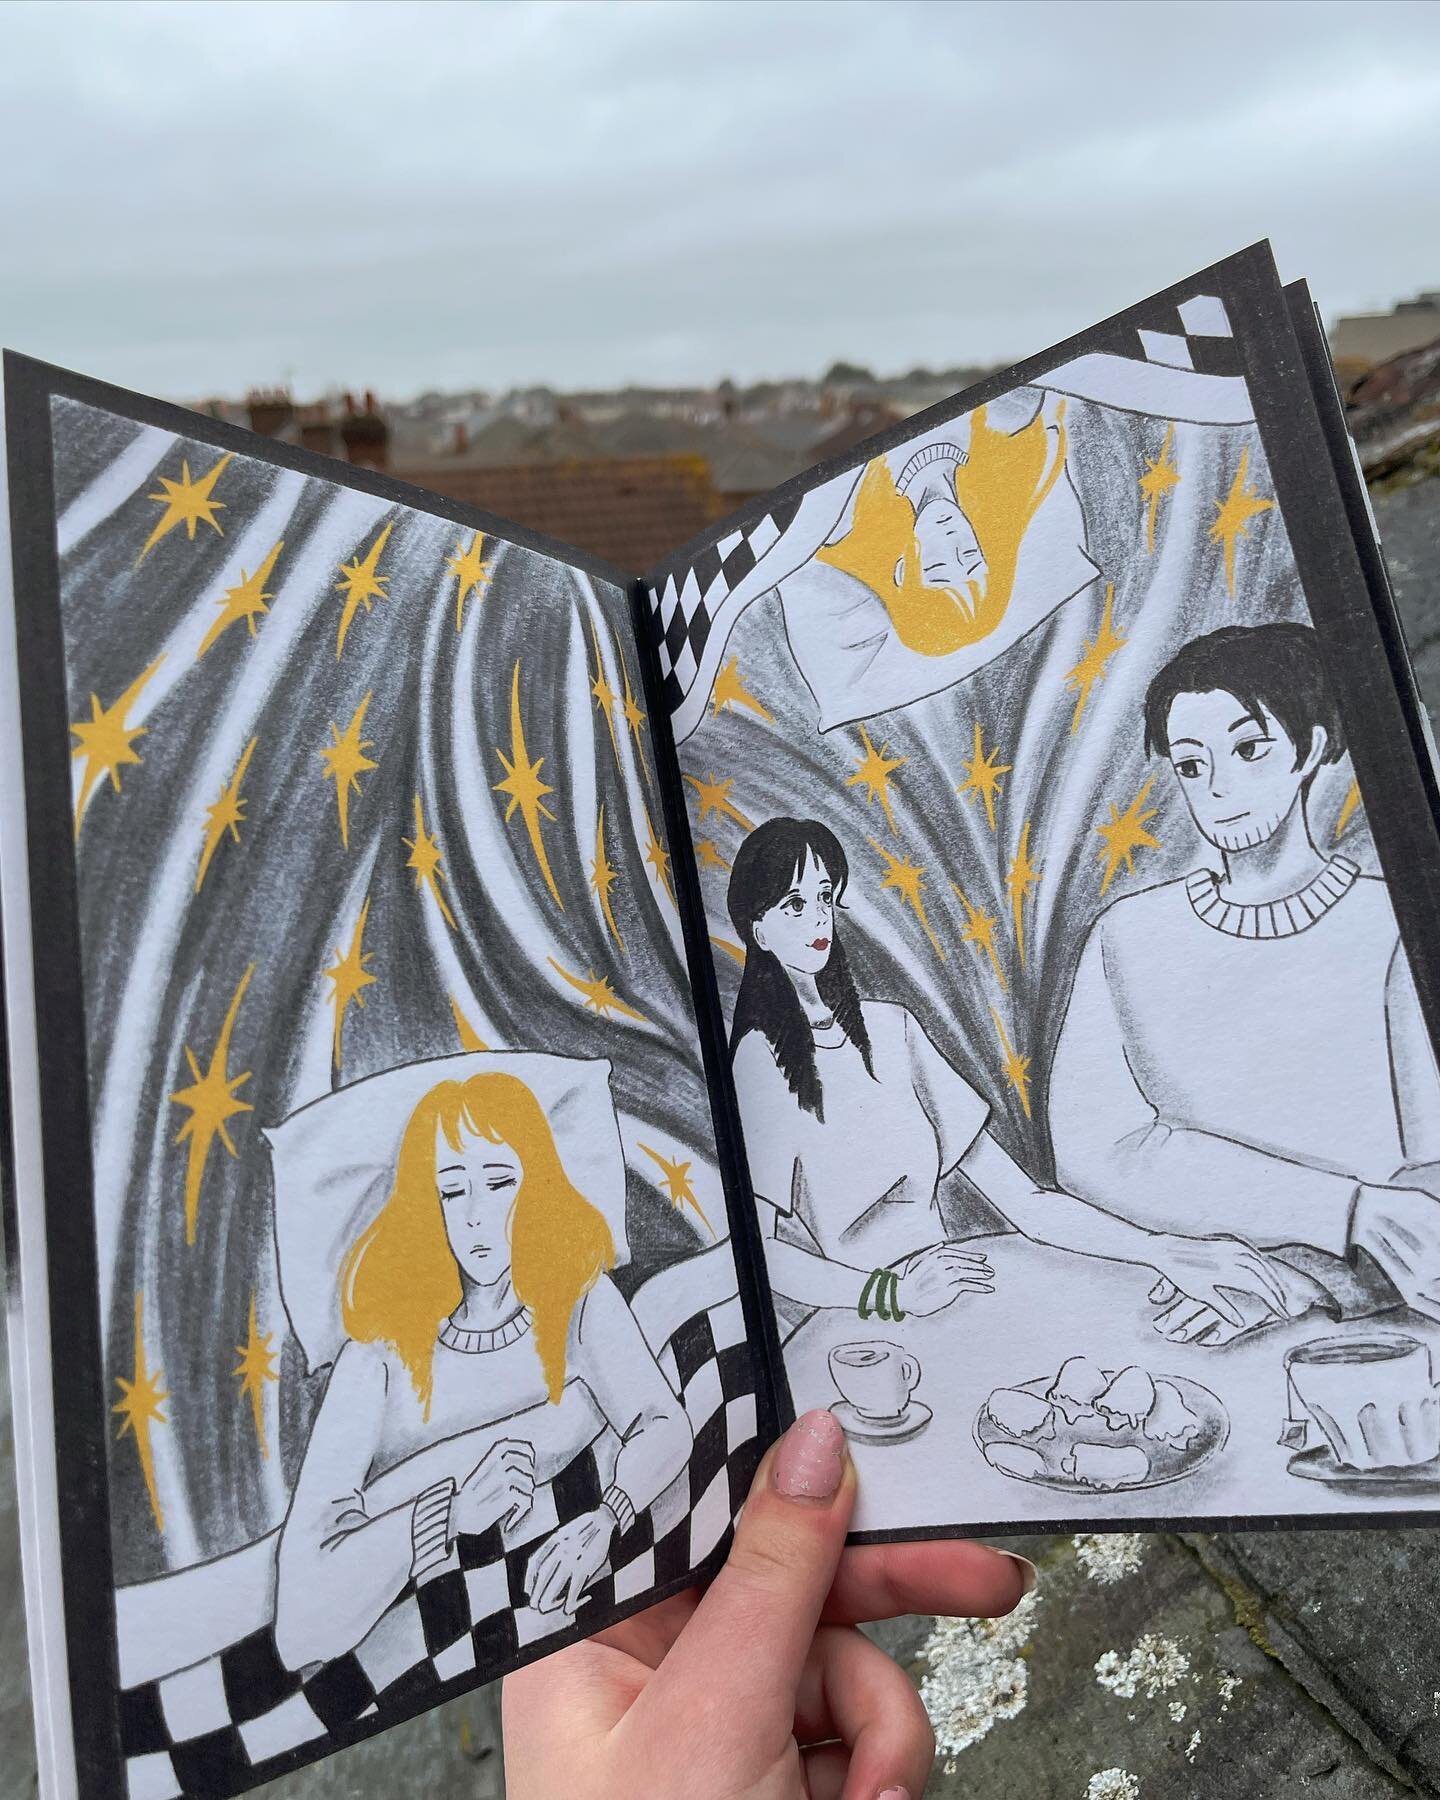 Last year's project for the Wordless narrative unit, based on Deborah Levy's story &quot;Roma&quot;.
A comic book based on love, affairs and even something more👀
.
.
.
.
#comicbook #illustration #illustrated #artistsoninstagram #book #bindery #handm